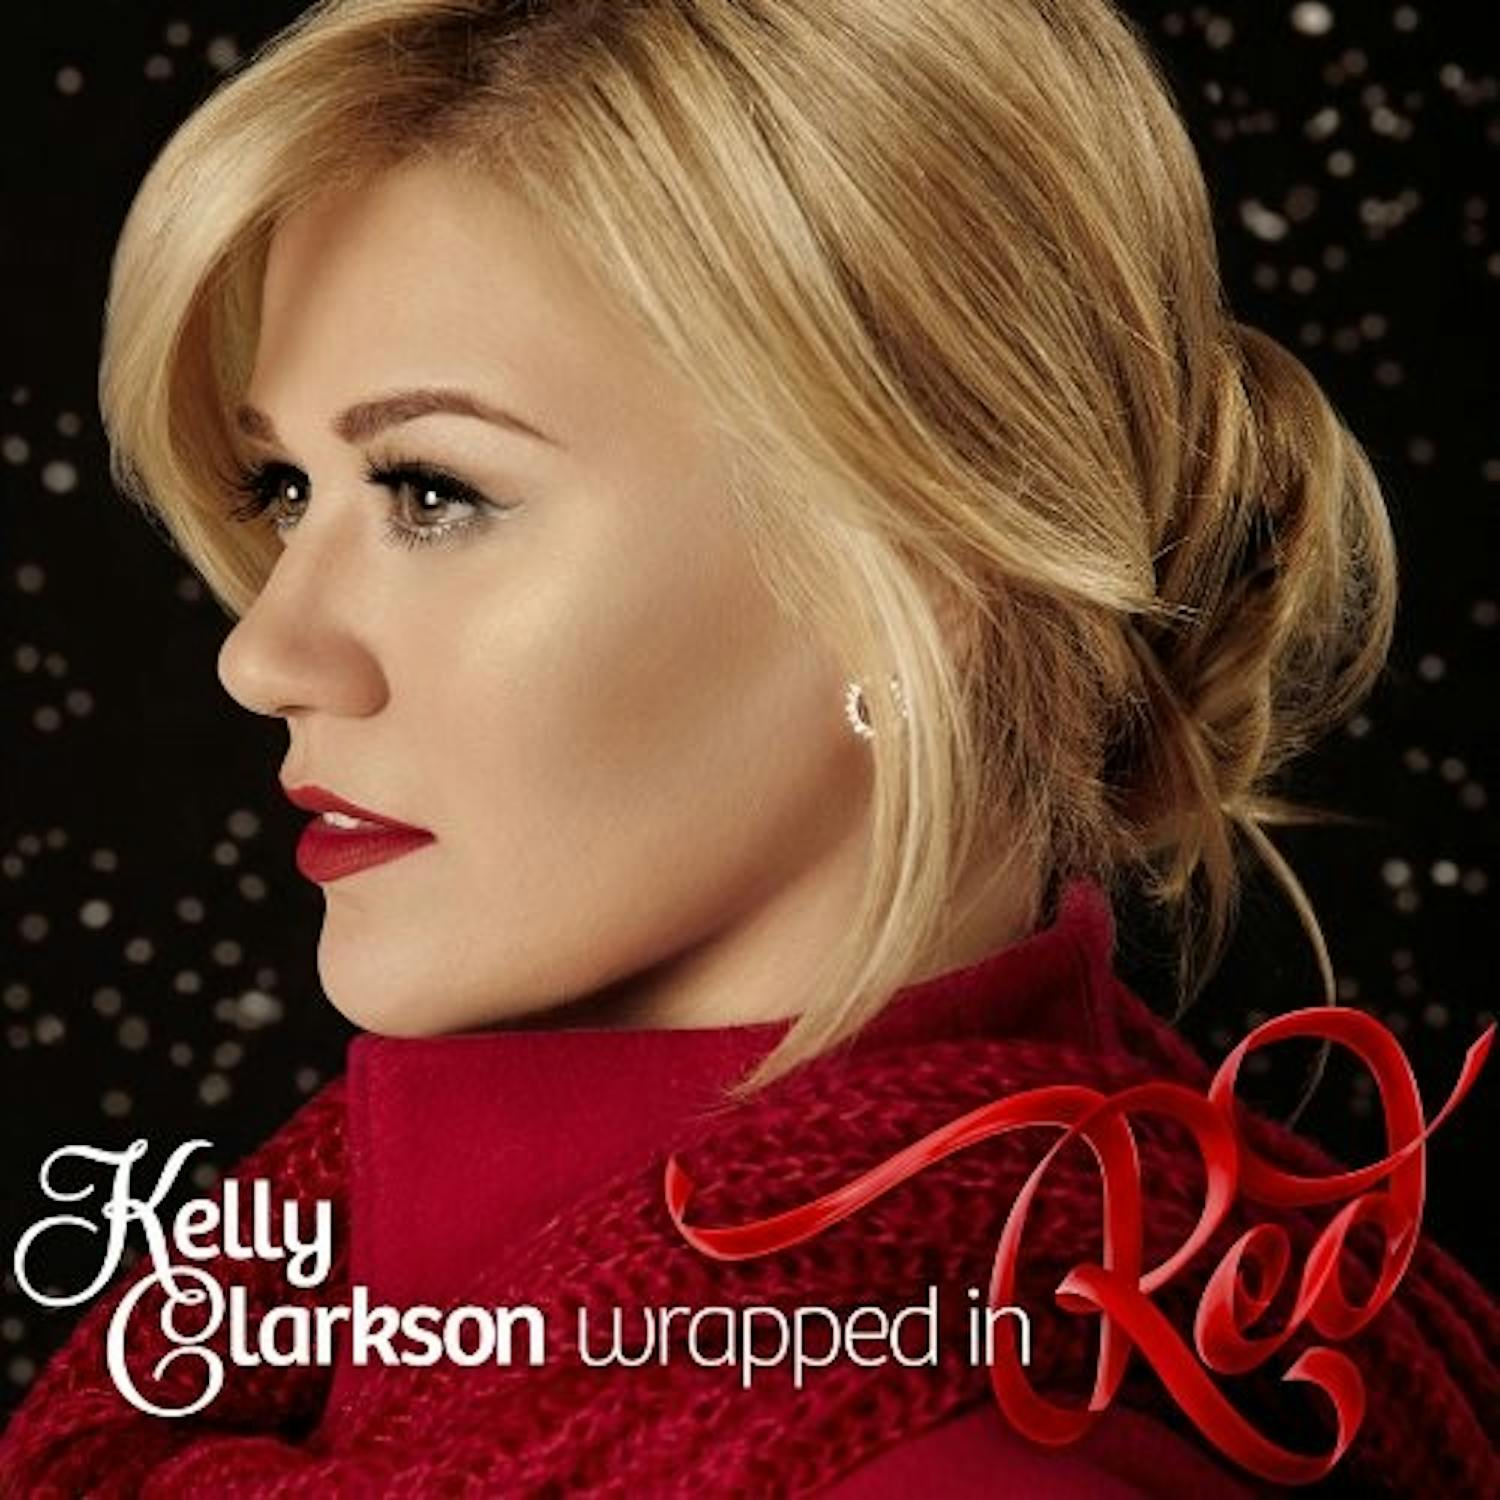 	Kelly Clarkson’s new album, “Wrapped in Red,” would make for a great stocking stuffer for Christmas music lovers.